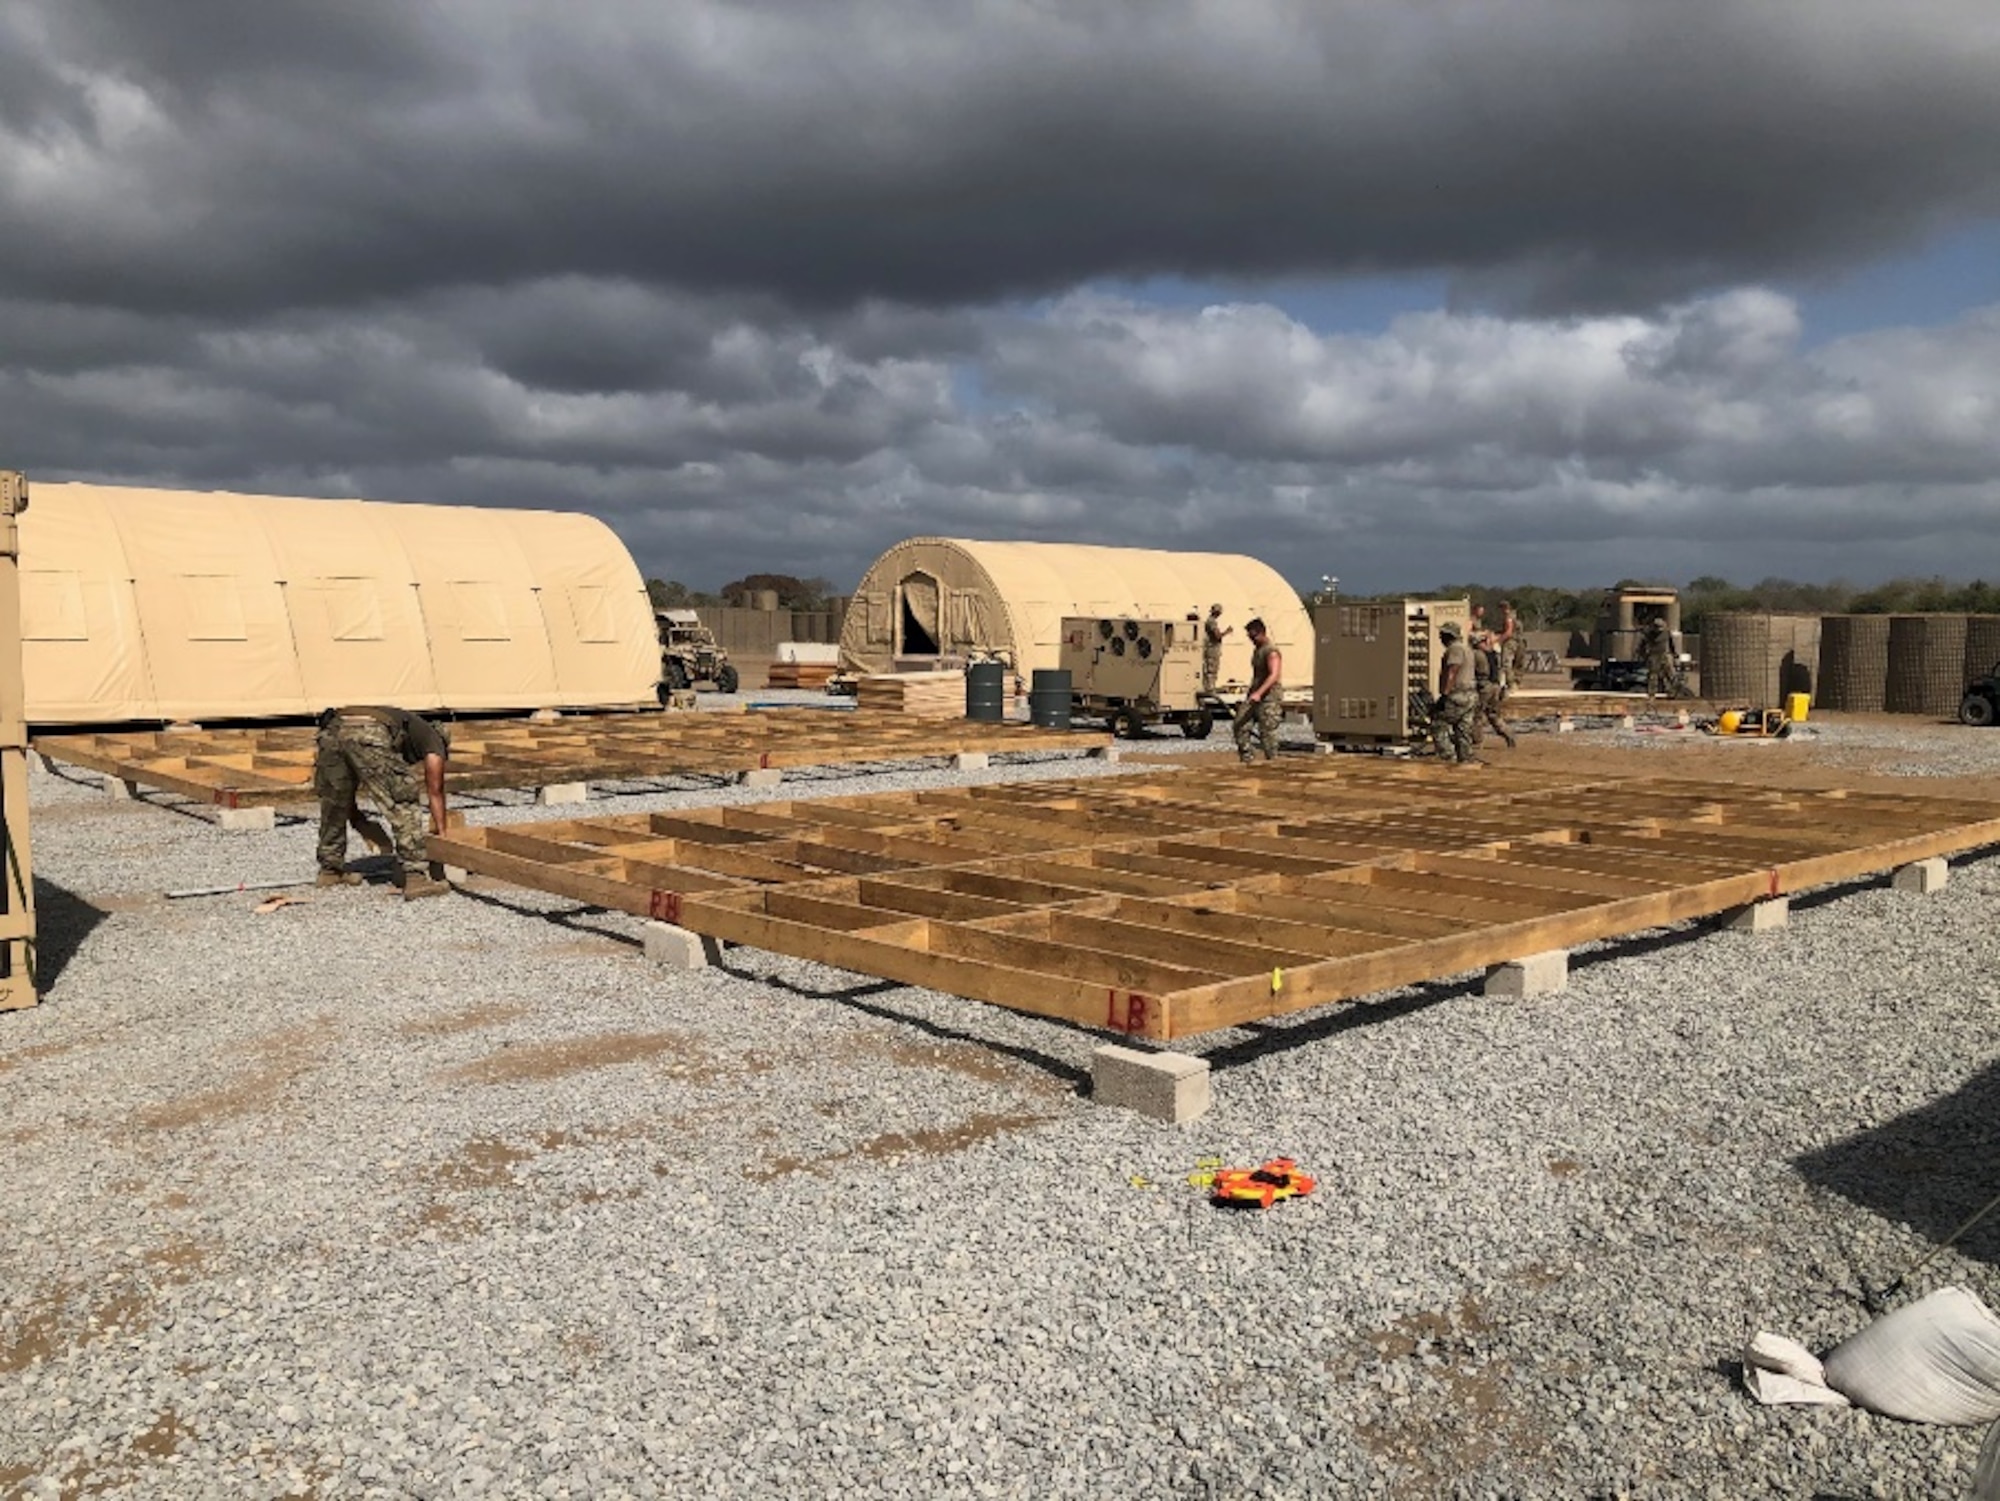 Airmen from the 435th Air Ground Operations Wing and 435th Air Expeditionary Wing execute a short-notice tasker to build-out a base capability in East Africa, Dec. 29, 2020. The Airmen renovated and developed a 3,000 square foot building to consolidate the Base Defense Operations Center, 475th Expeditionary Air Base Squadron Staff and the U.S. Army’s Task Force Bayonet security forces into a single joint facility. (Courtesy photo)